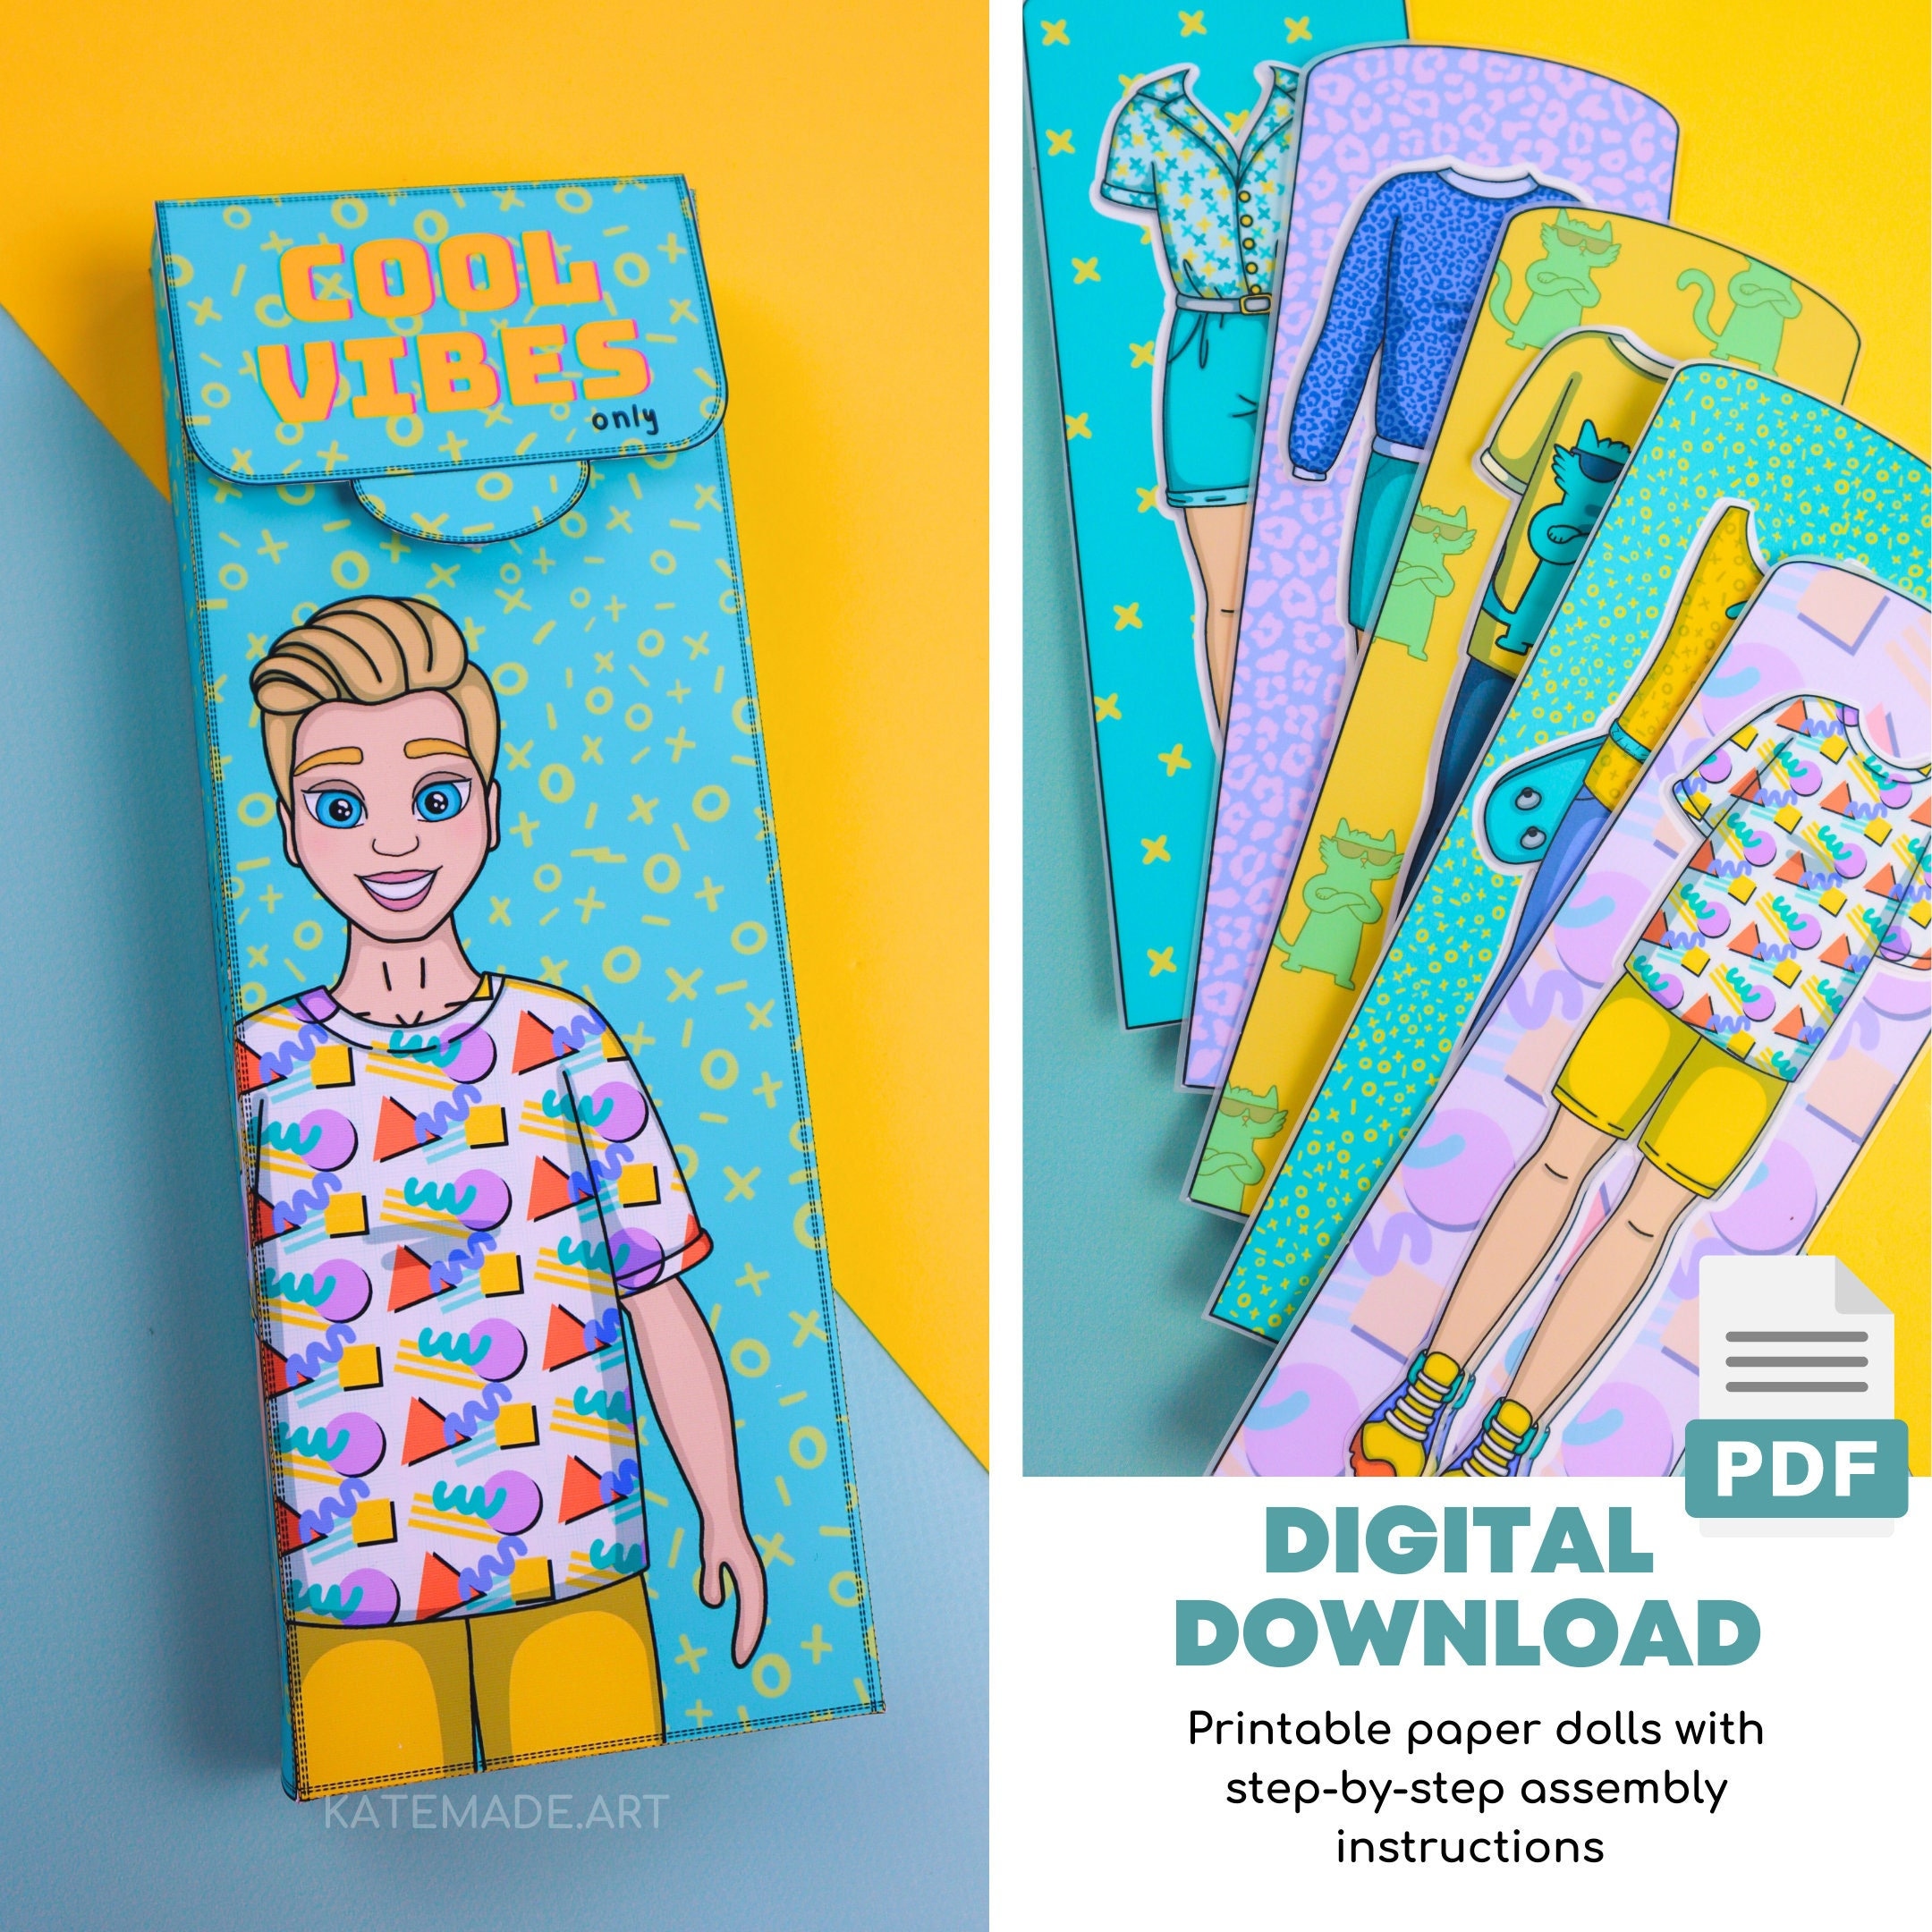 Clothes for Paper Dolls Printable DIY Activities, Girls Activity Book,  Paper Crafts for Kids 